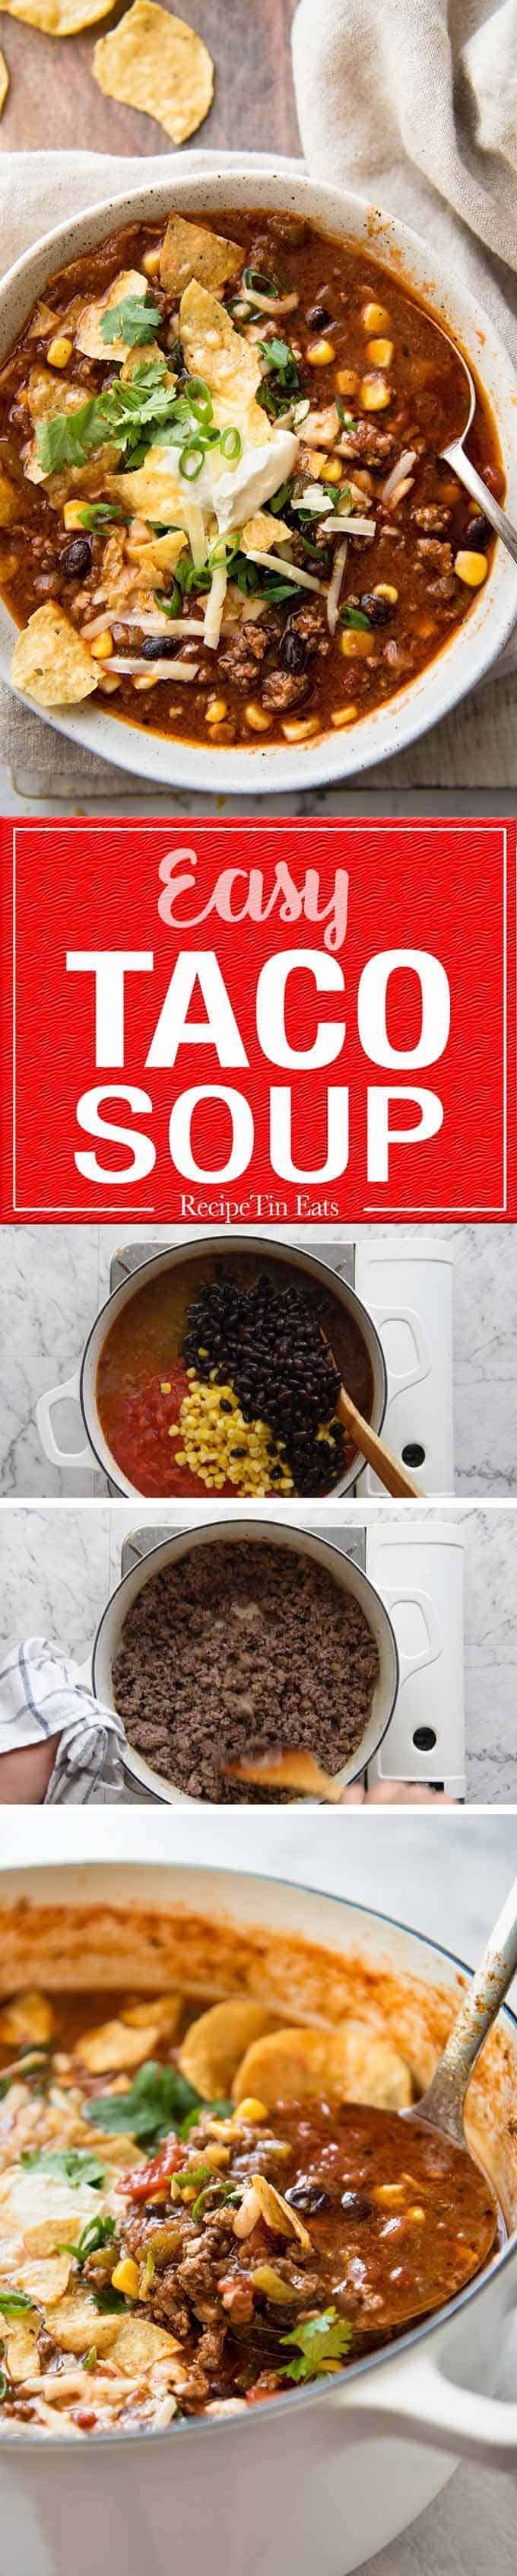 Easy Taco Soup - Made with beef, beans and corn, and either a homemade or store bought taco seasoning. Absolute crowd pleaser, thick and warms the soul. Don't skip the toppings!! www.recipetineats.com